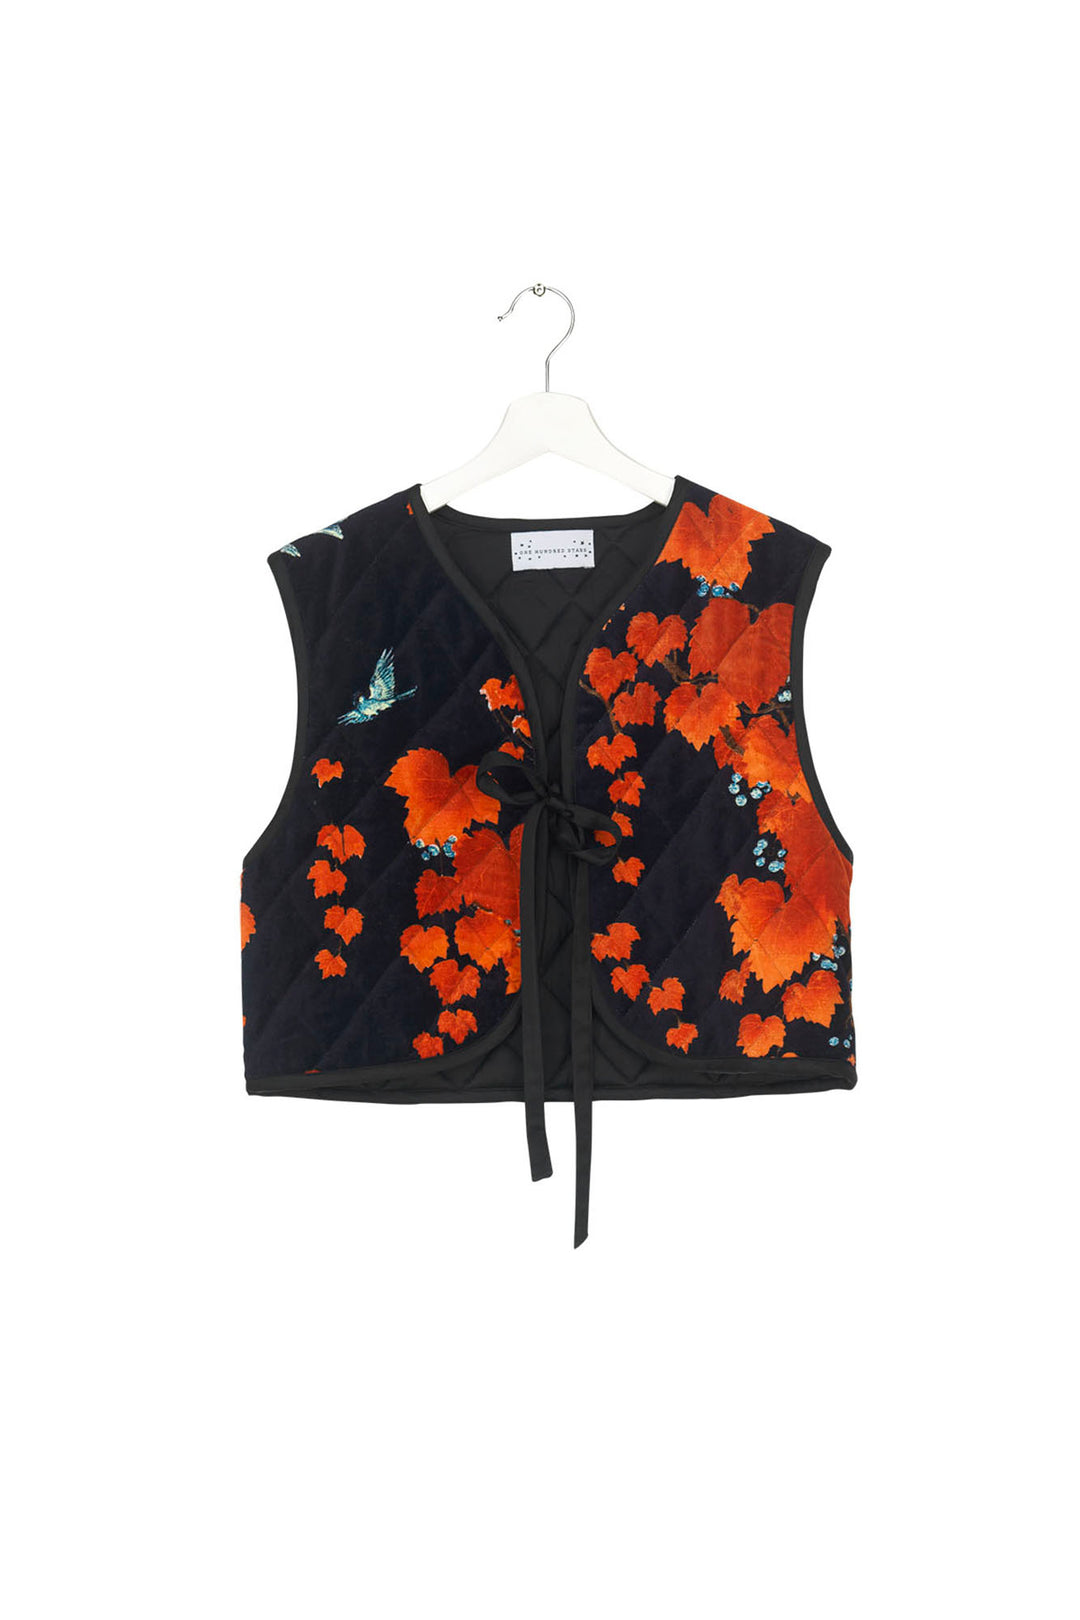 ladies velvet gilet with red maple leafs on black background by One Hundred Stars